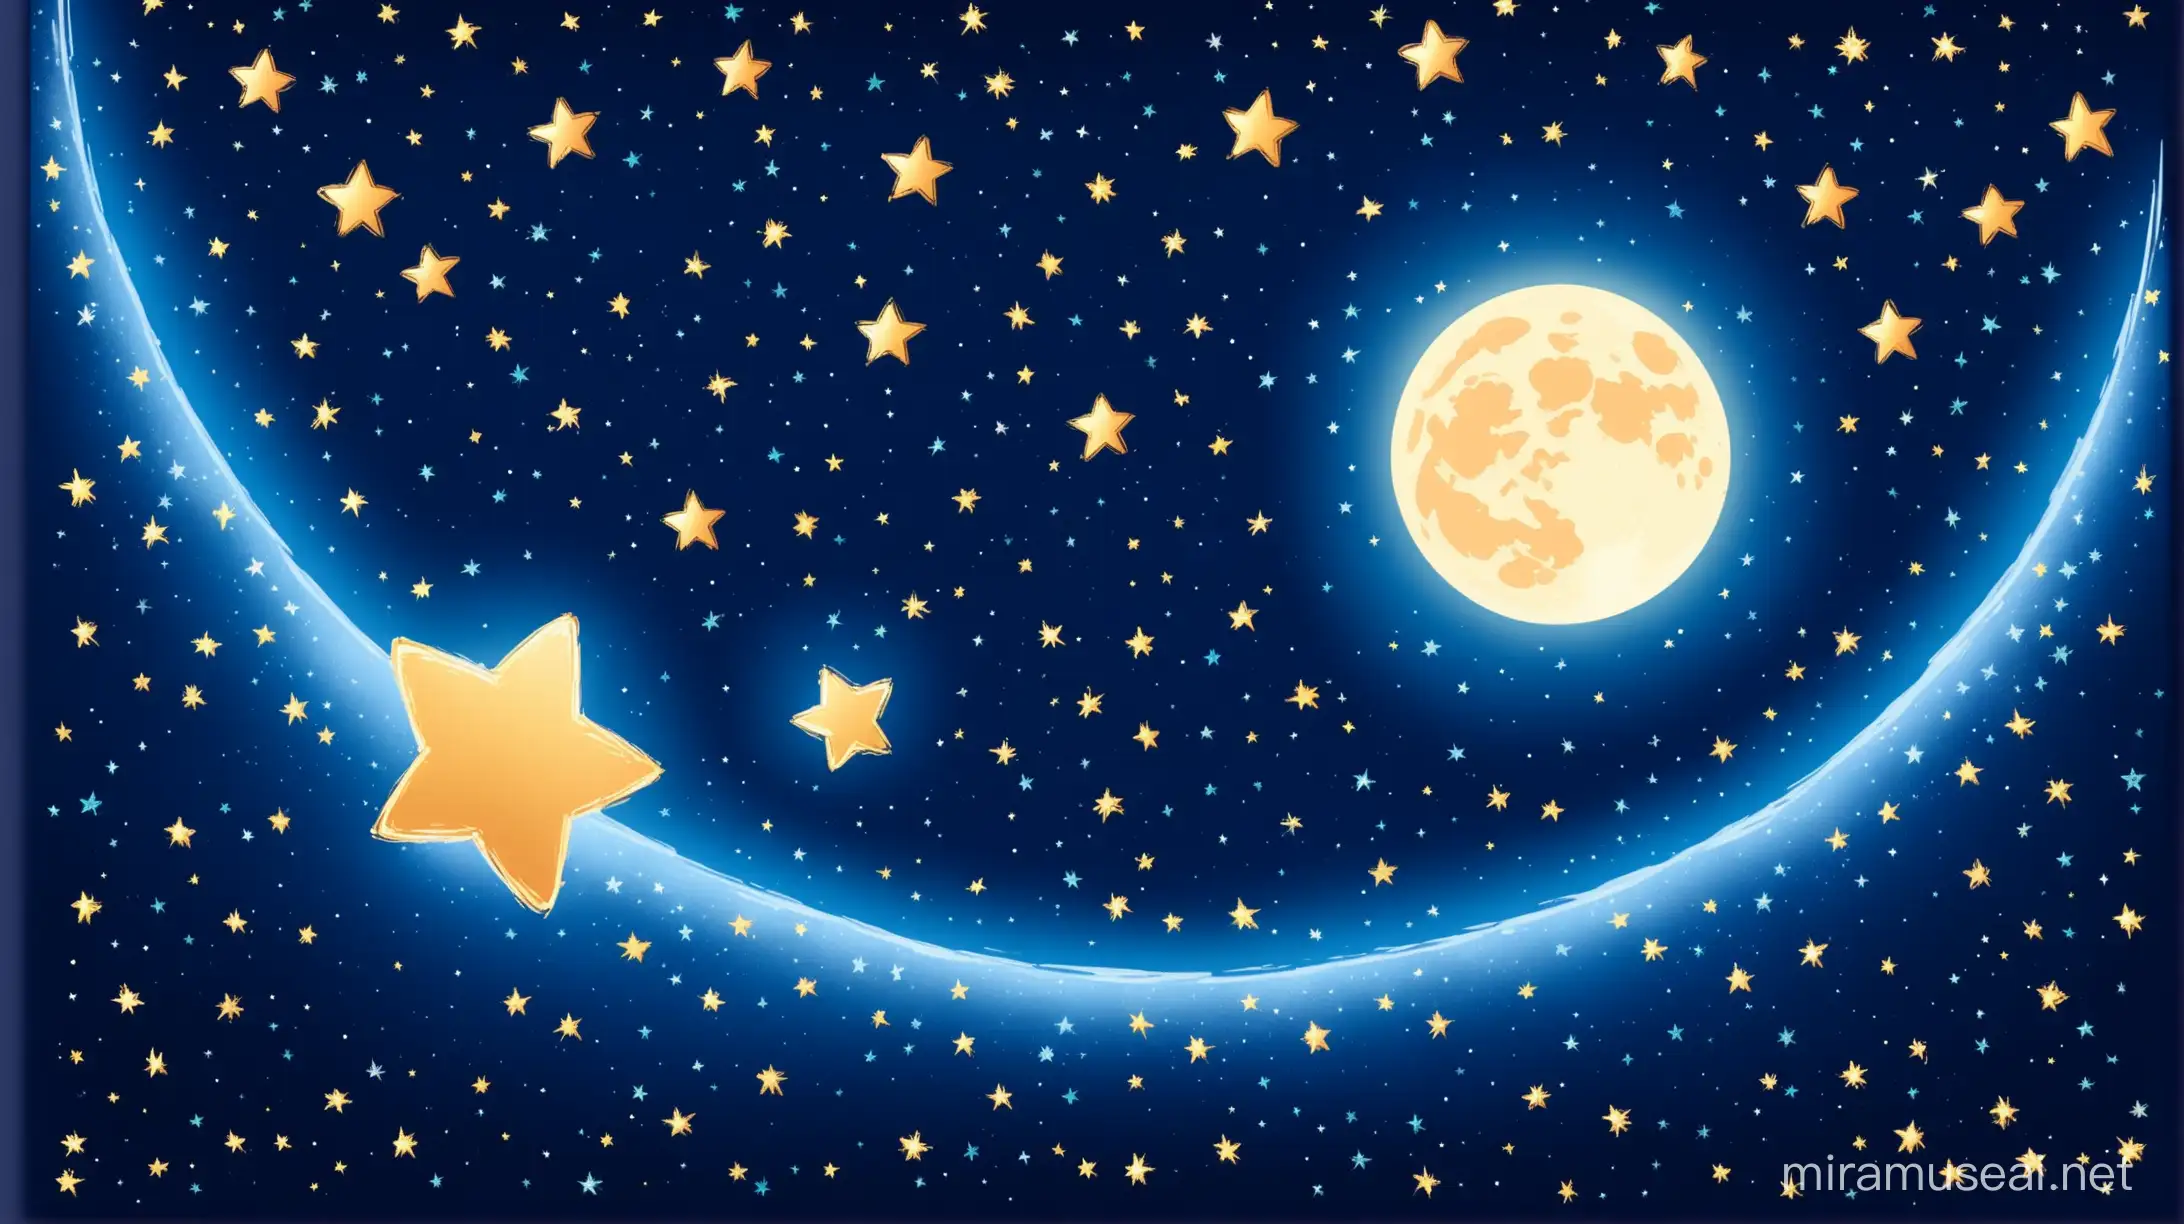 Starry Night Sky with Moon and Shining Stars Painting